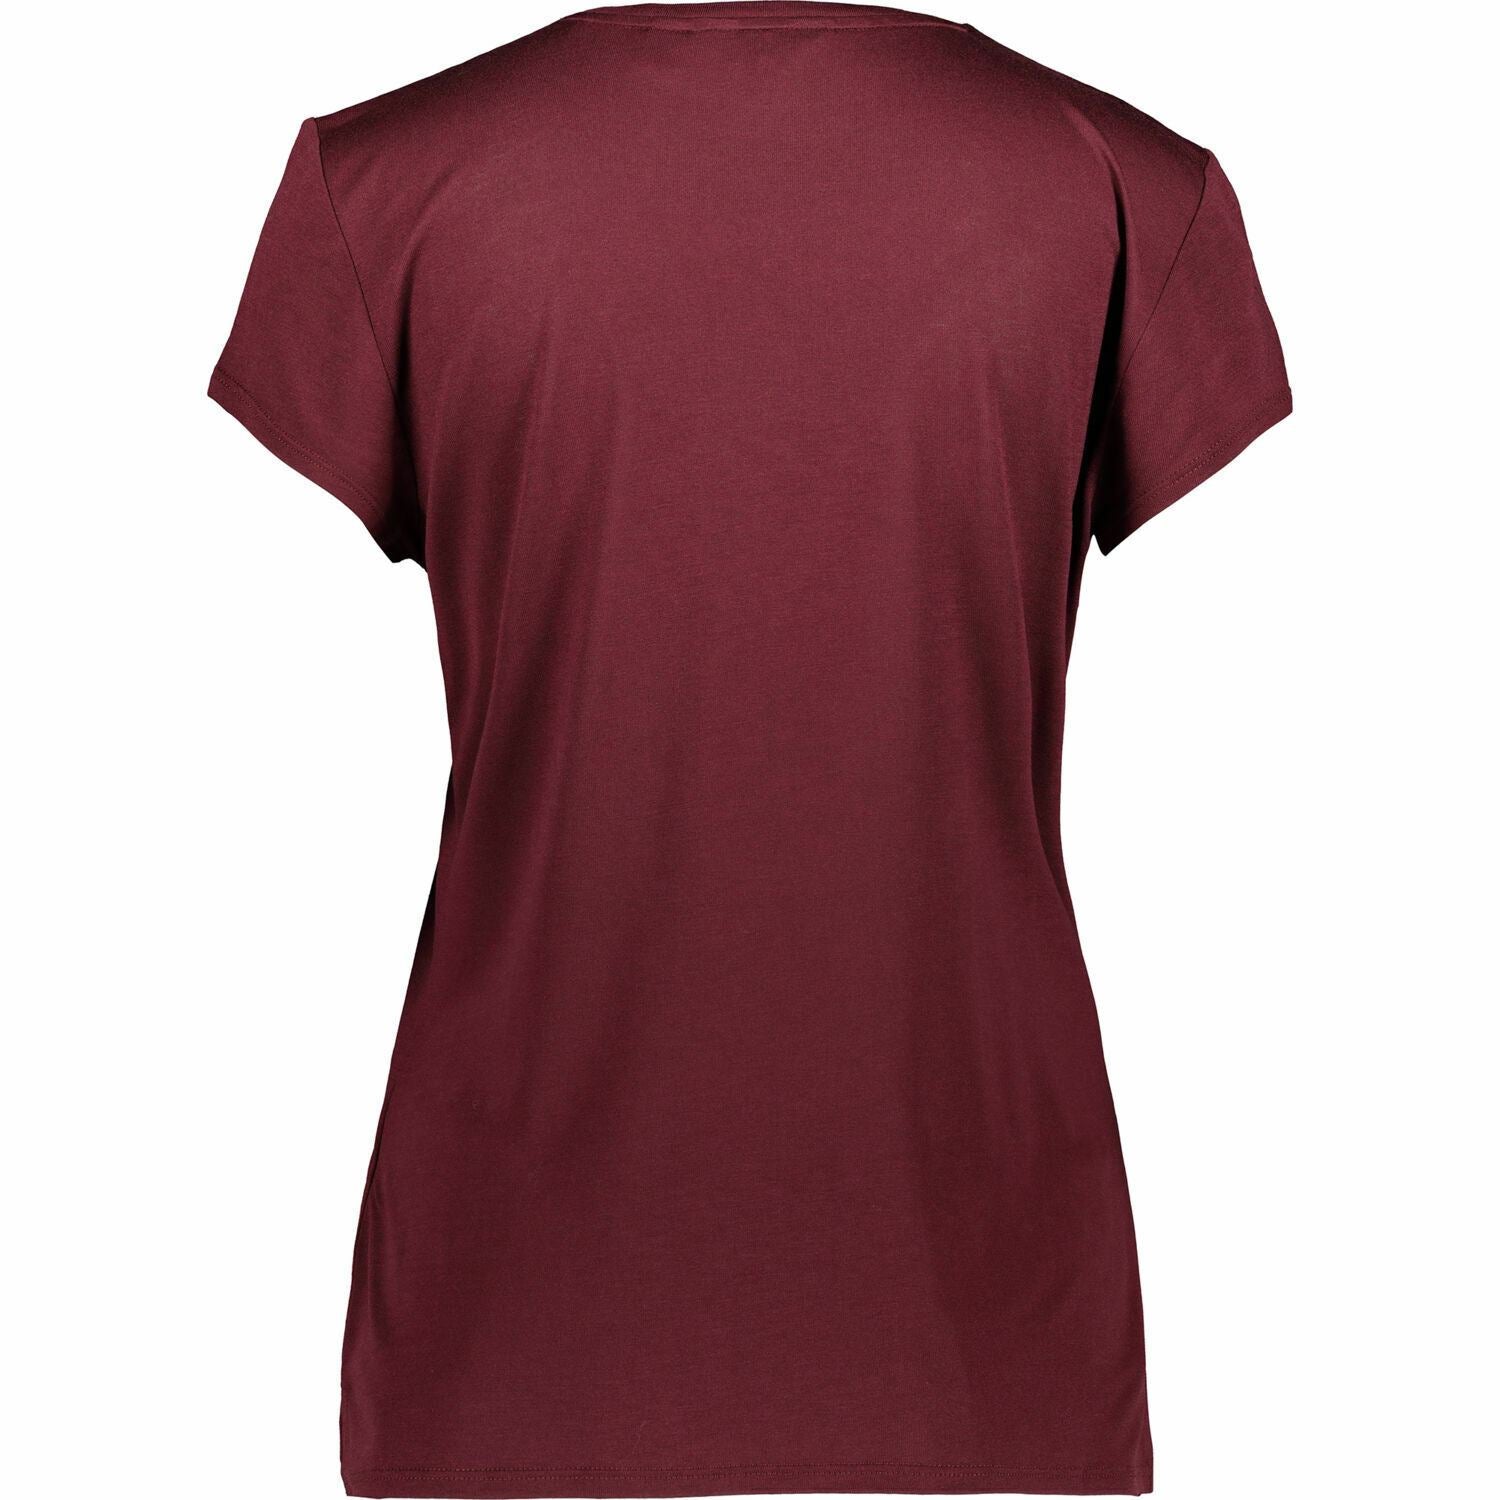 Women's Ted Baker Burgundy Relax T-Shirt Ted Baker Size T2 Size S-M, RRP£49